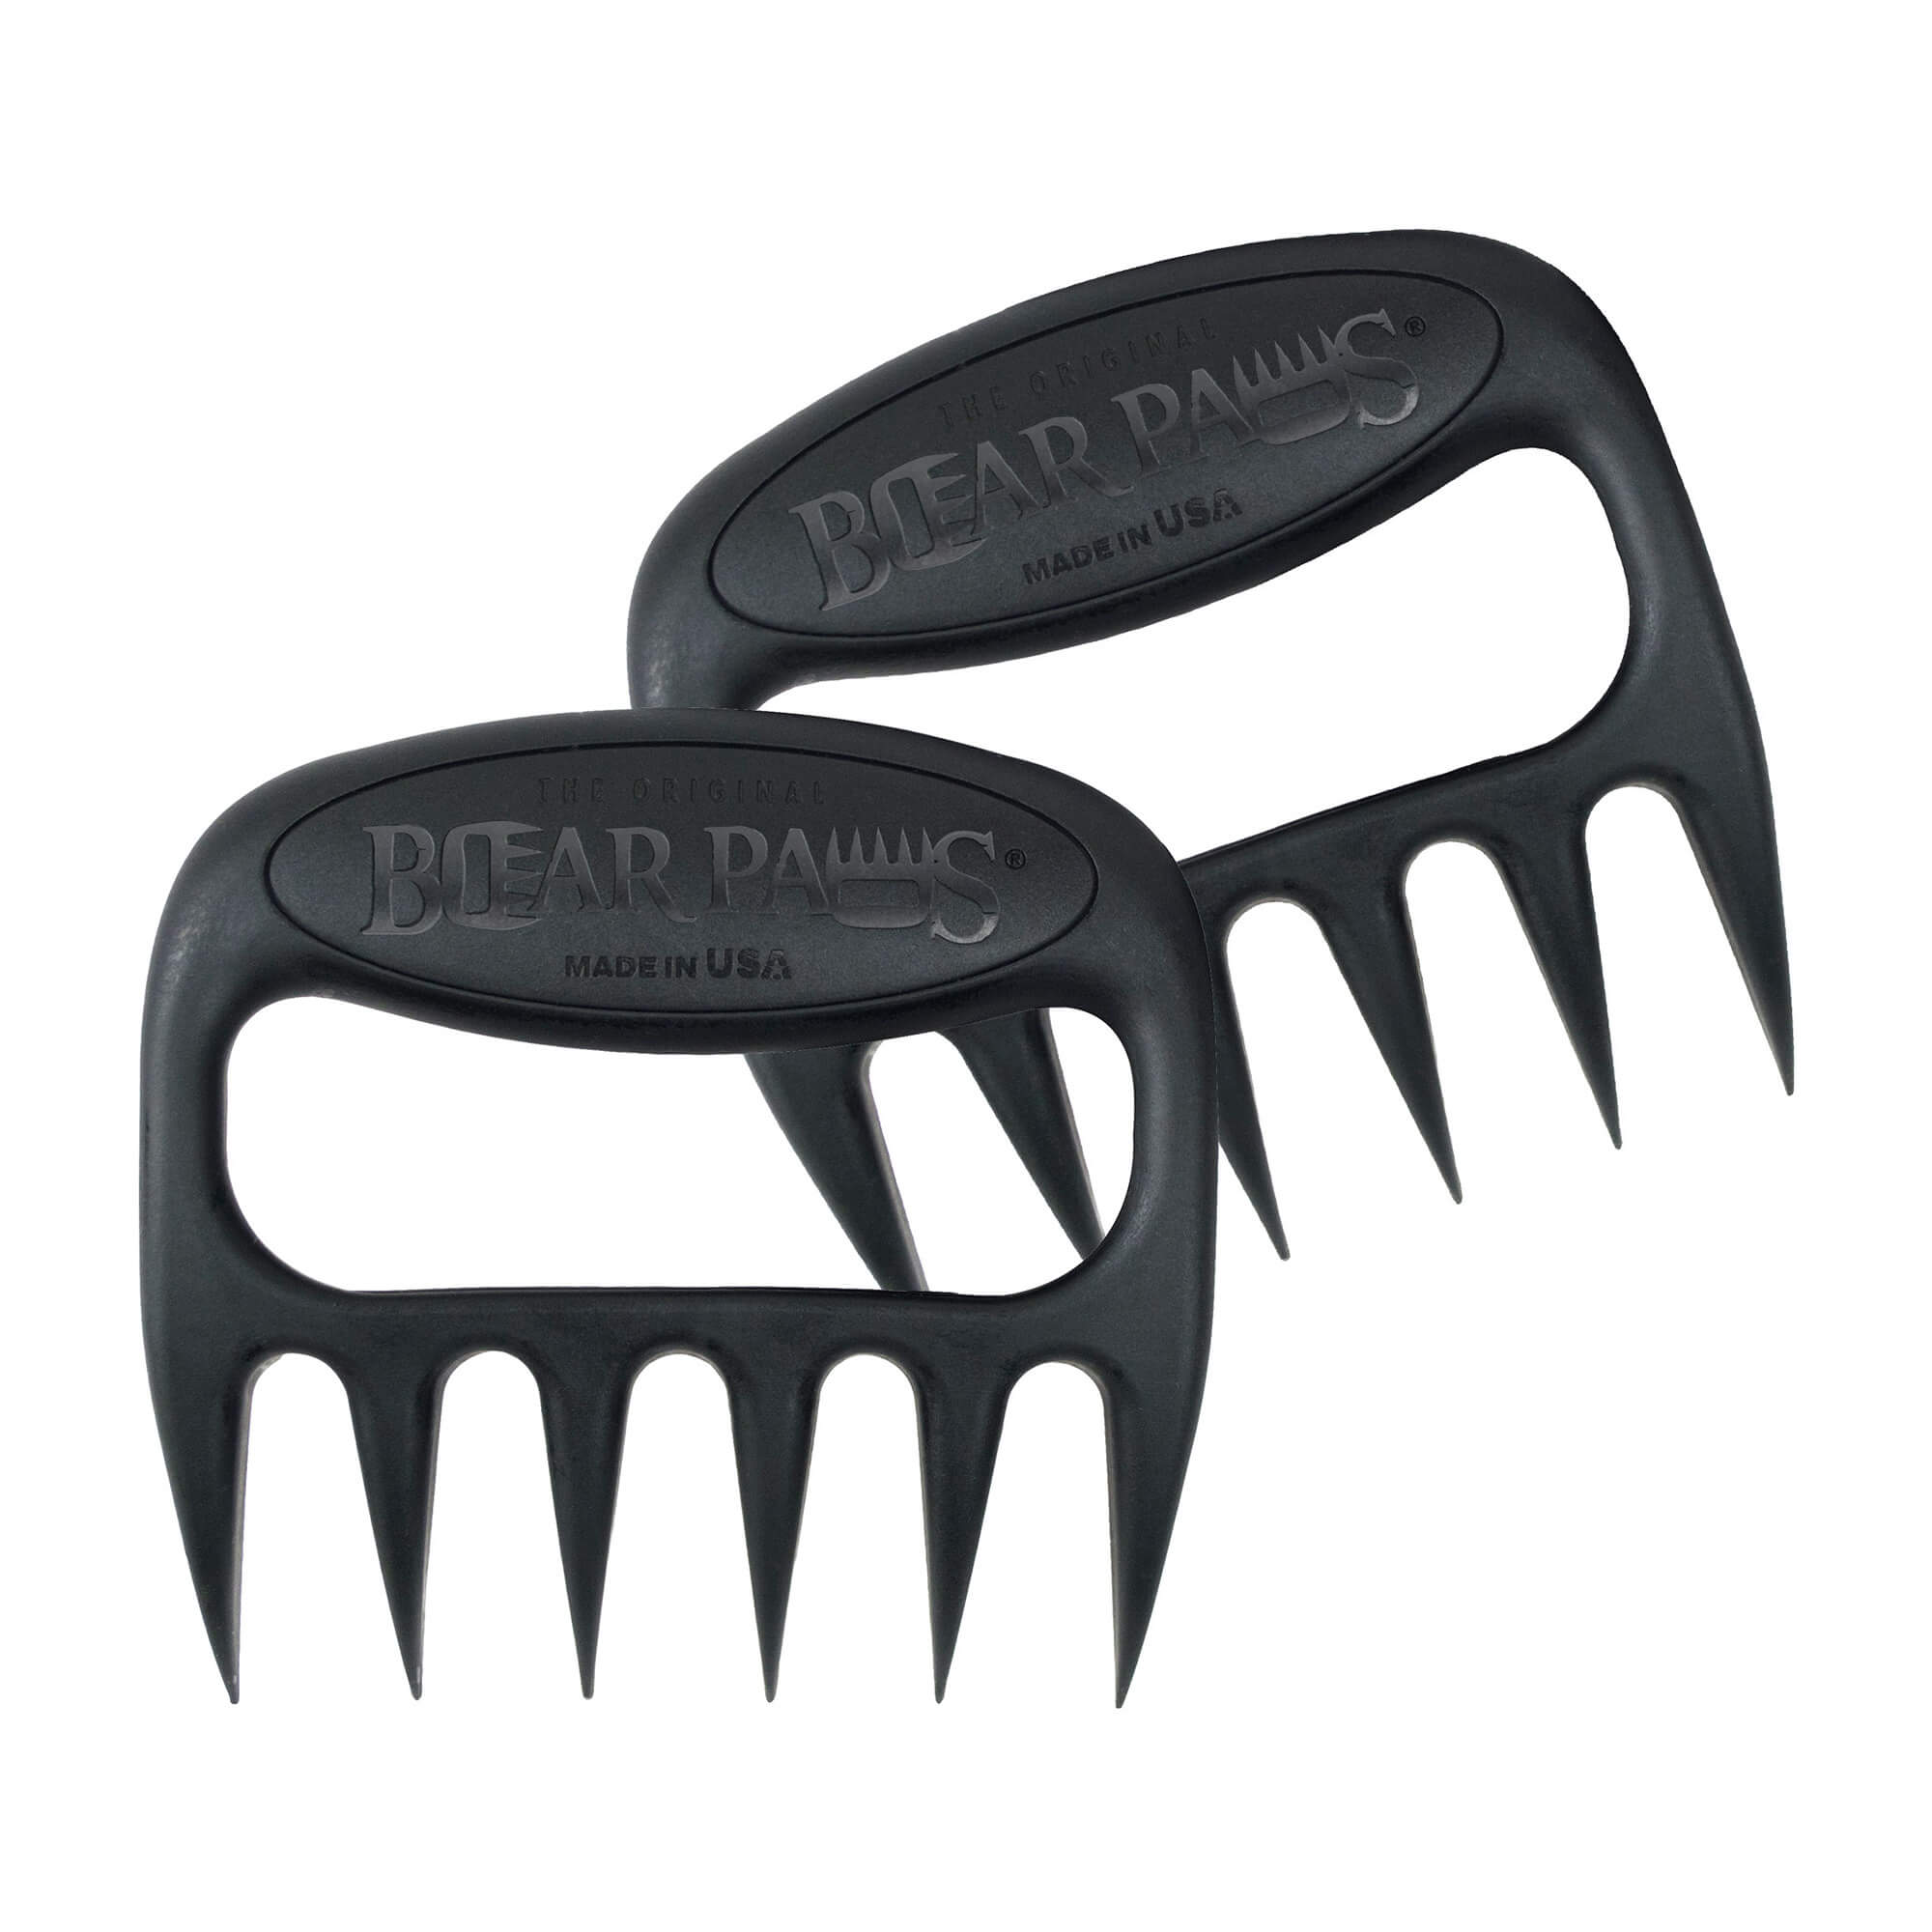 Bear Claw Stainless Steel Grilled Meat Shredder Claws Handling